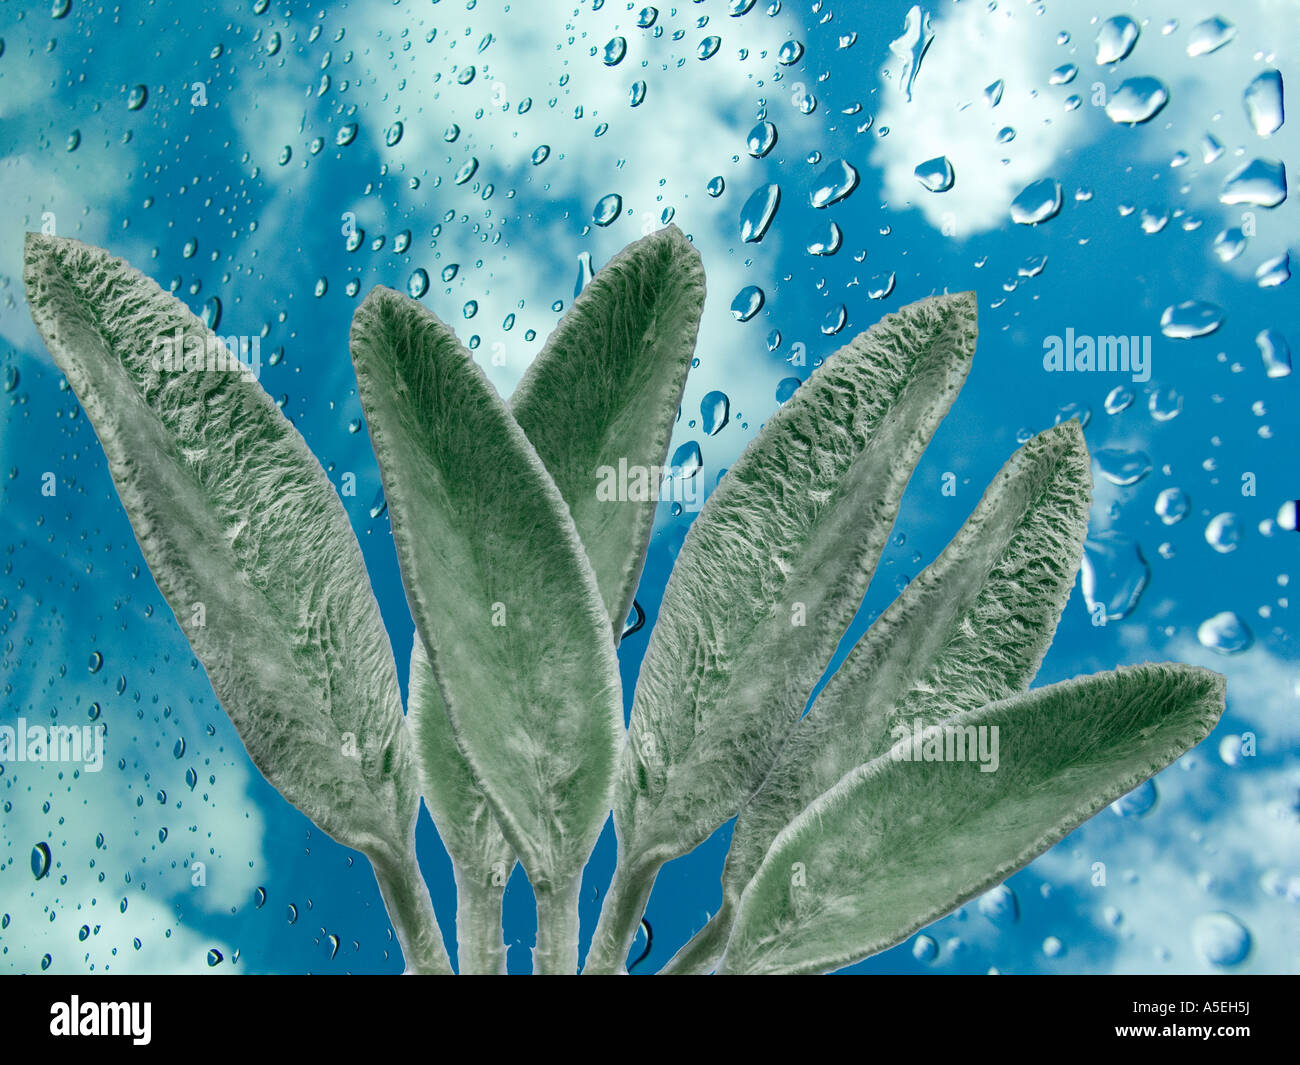 Leaves of lambs ear Stachys lanata against a background of blue and white sky with raindrops Stock Photo